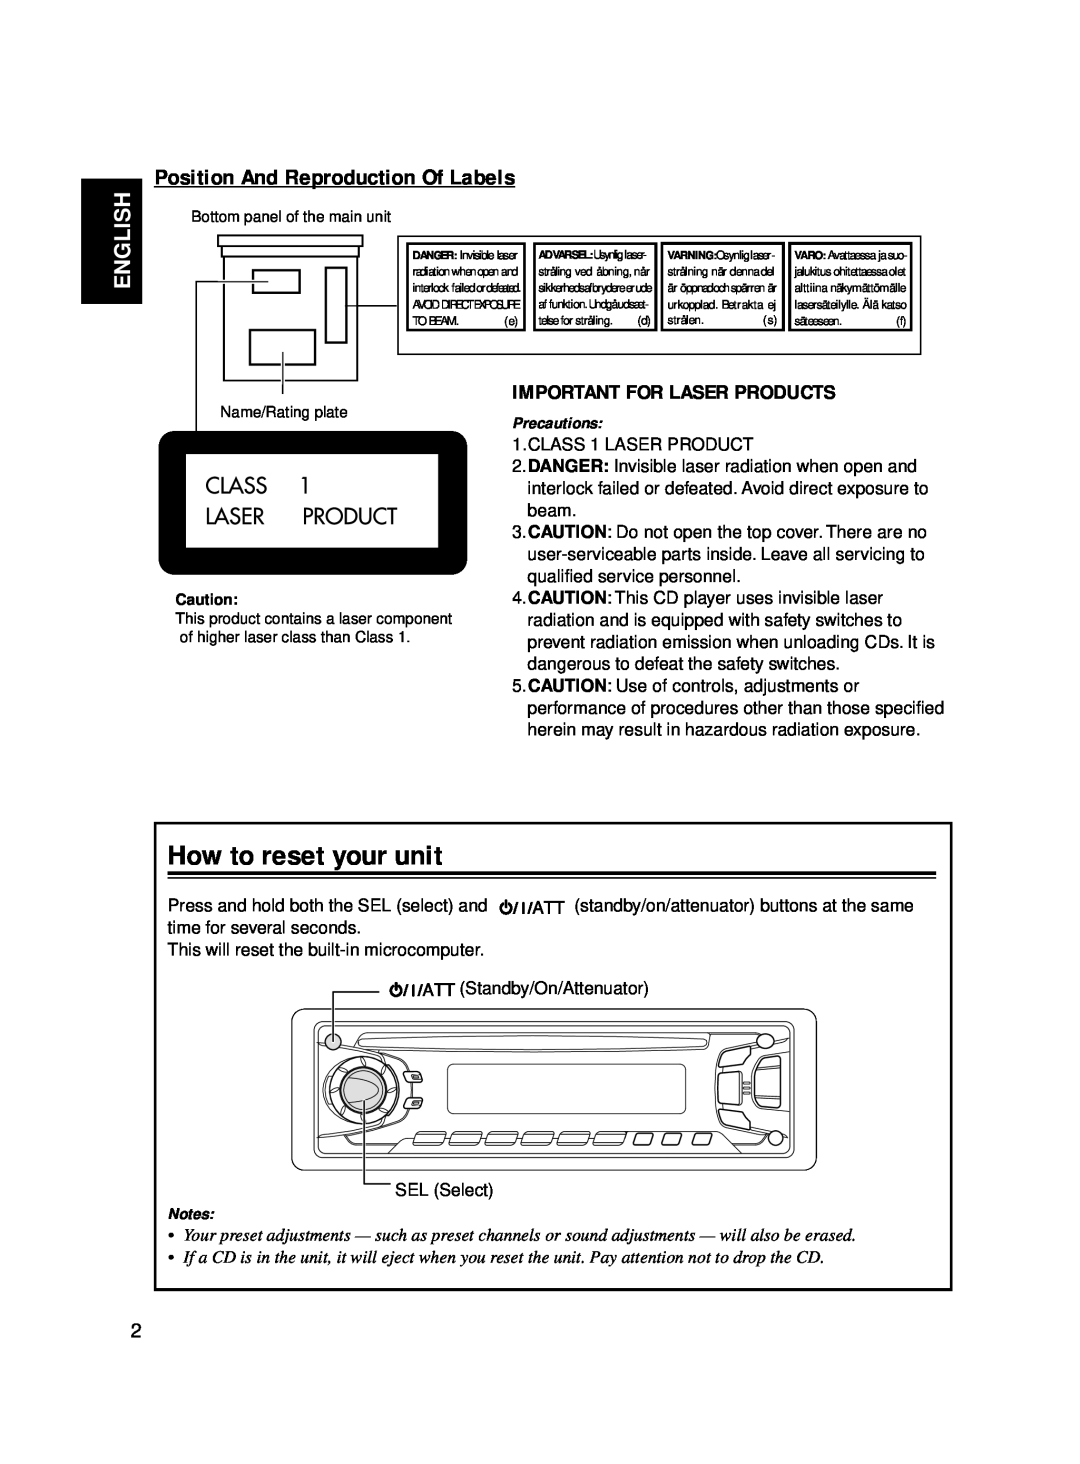 JVC KD-S713R, KD-S711R How to reset your unit, Position And Reproduction Of Labels, English, Important For Laser Products 